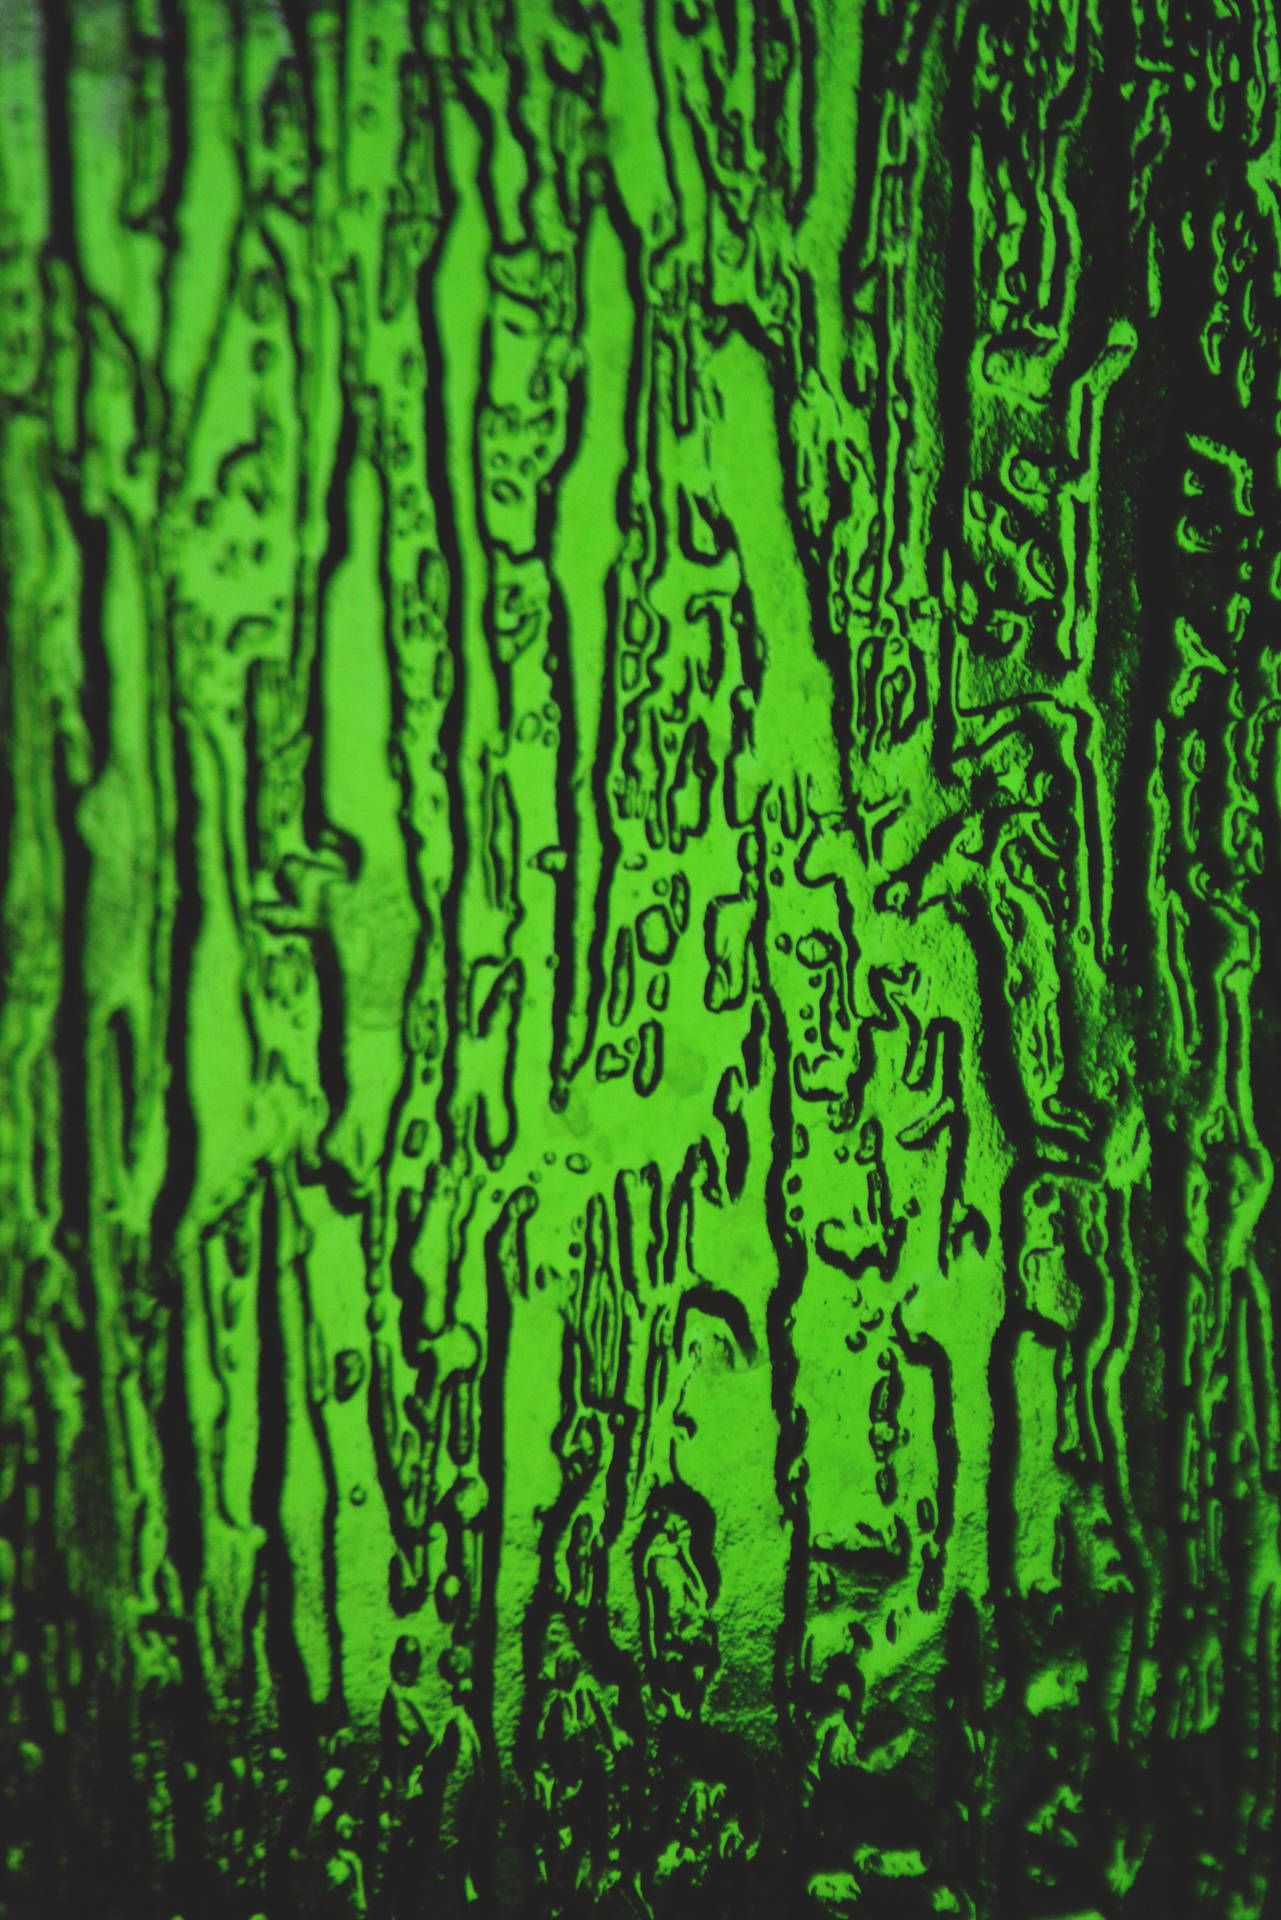 Green 3000X4496 Wallpaper and Background Image